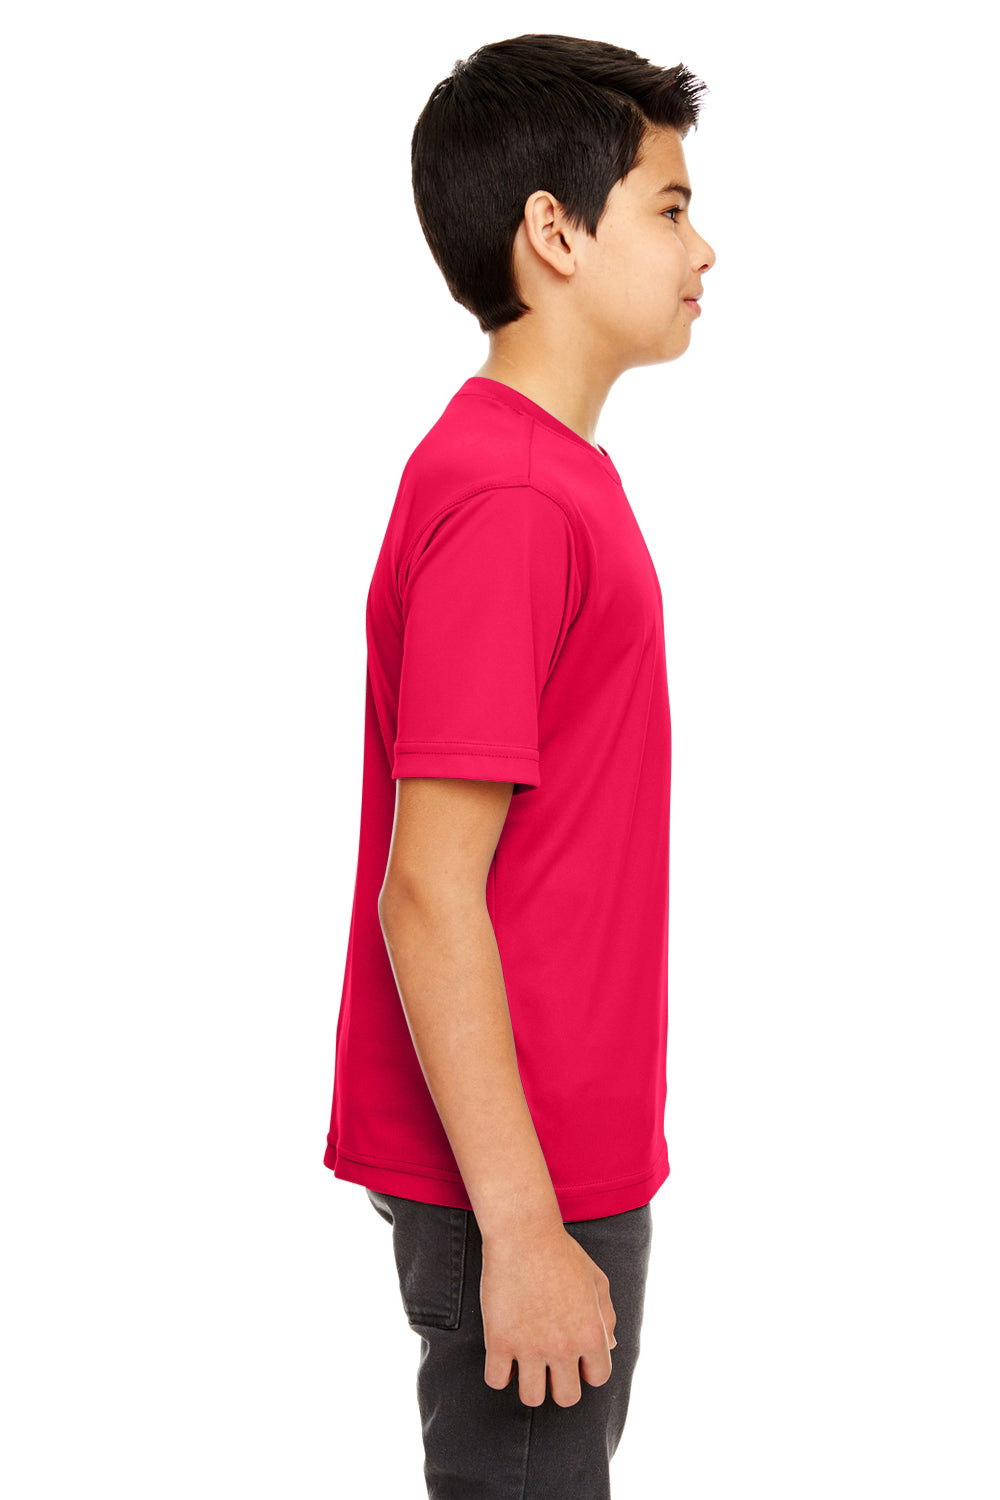 UltraClub 8620Y Youth Cool & Dry Performance Moisture Wicking Short Sleeve Crewneck T-Shirt Red Side